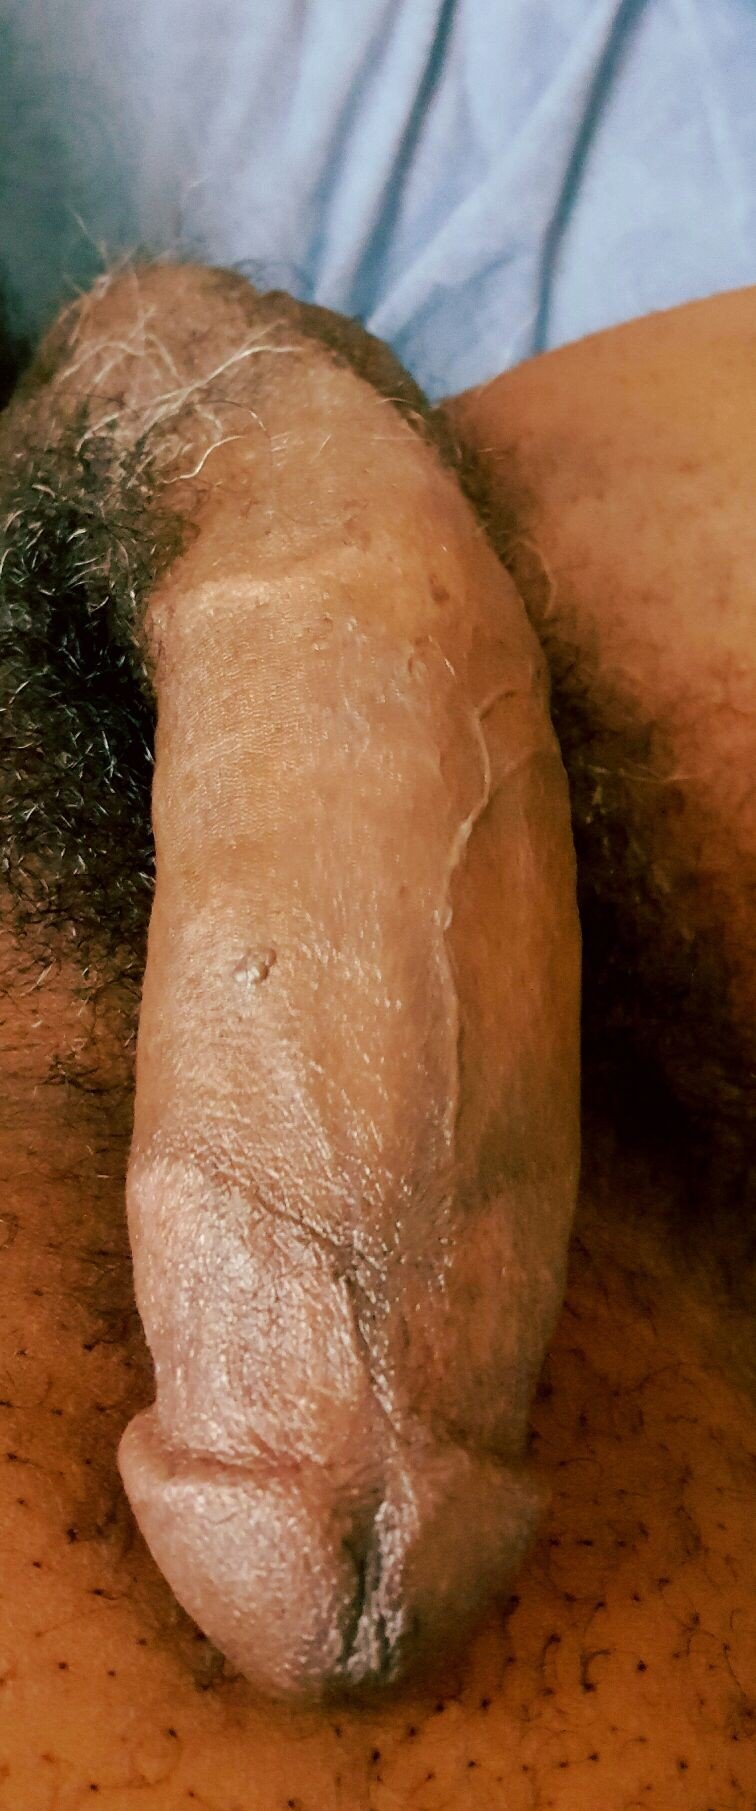 Photo by MrCaramelCock with the username @MrCaramelCock,  March 11, 2020 at 2:34 AM and the text says 'Yes ladies, your significant other Mr. Cuck will enjoy watching you get pounded by my MASSIVE BLACK COCK as you enter into sheer pleasure and delight from SUCKING and RIDING on this bad boy. GET ON IT!!!'